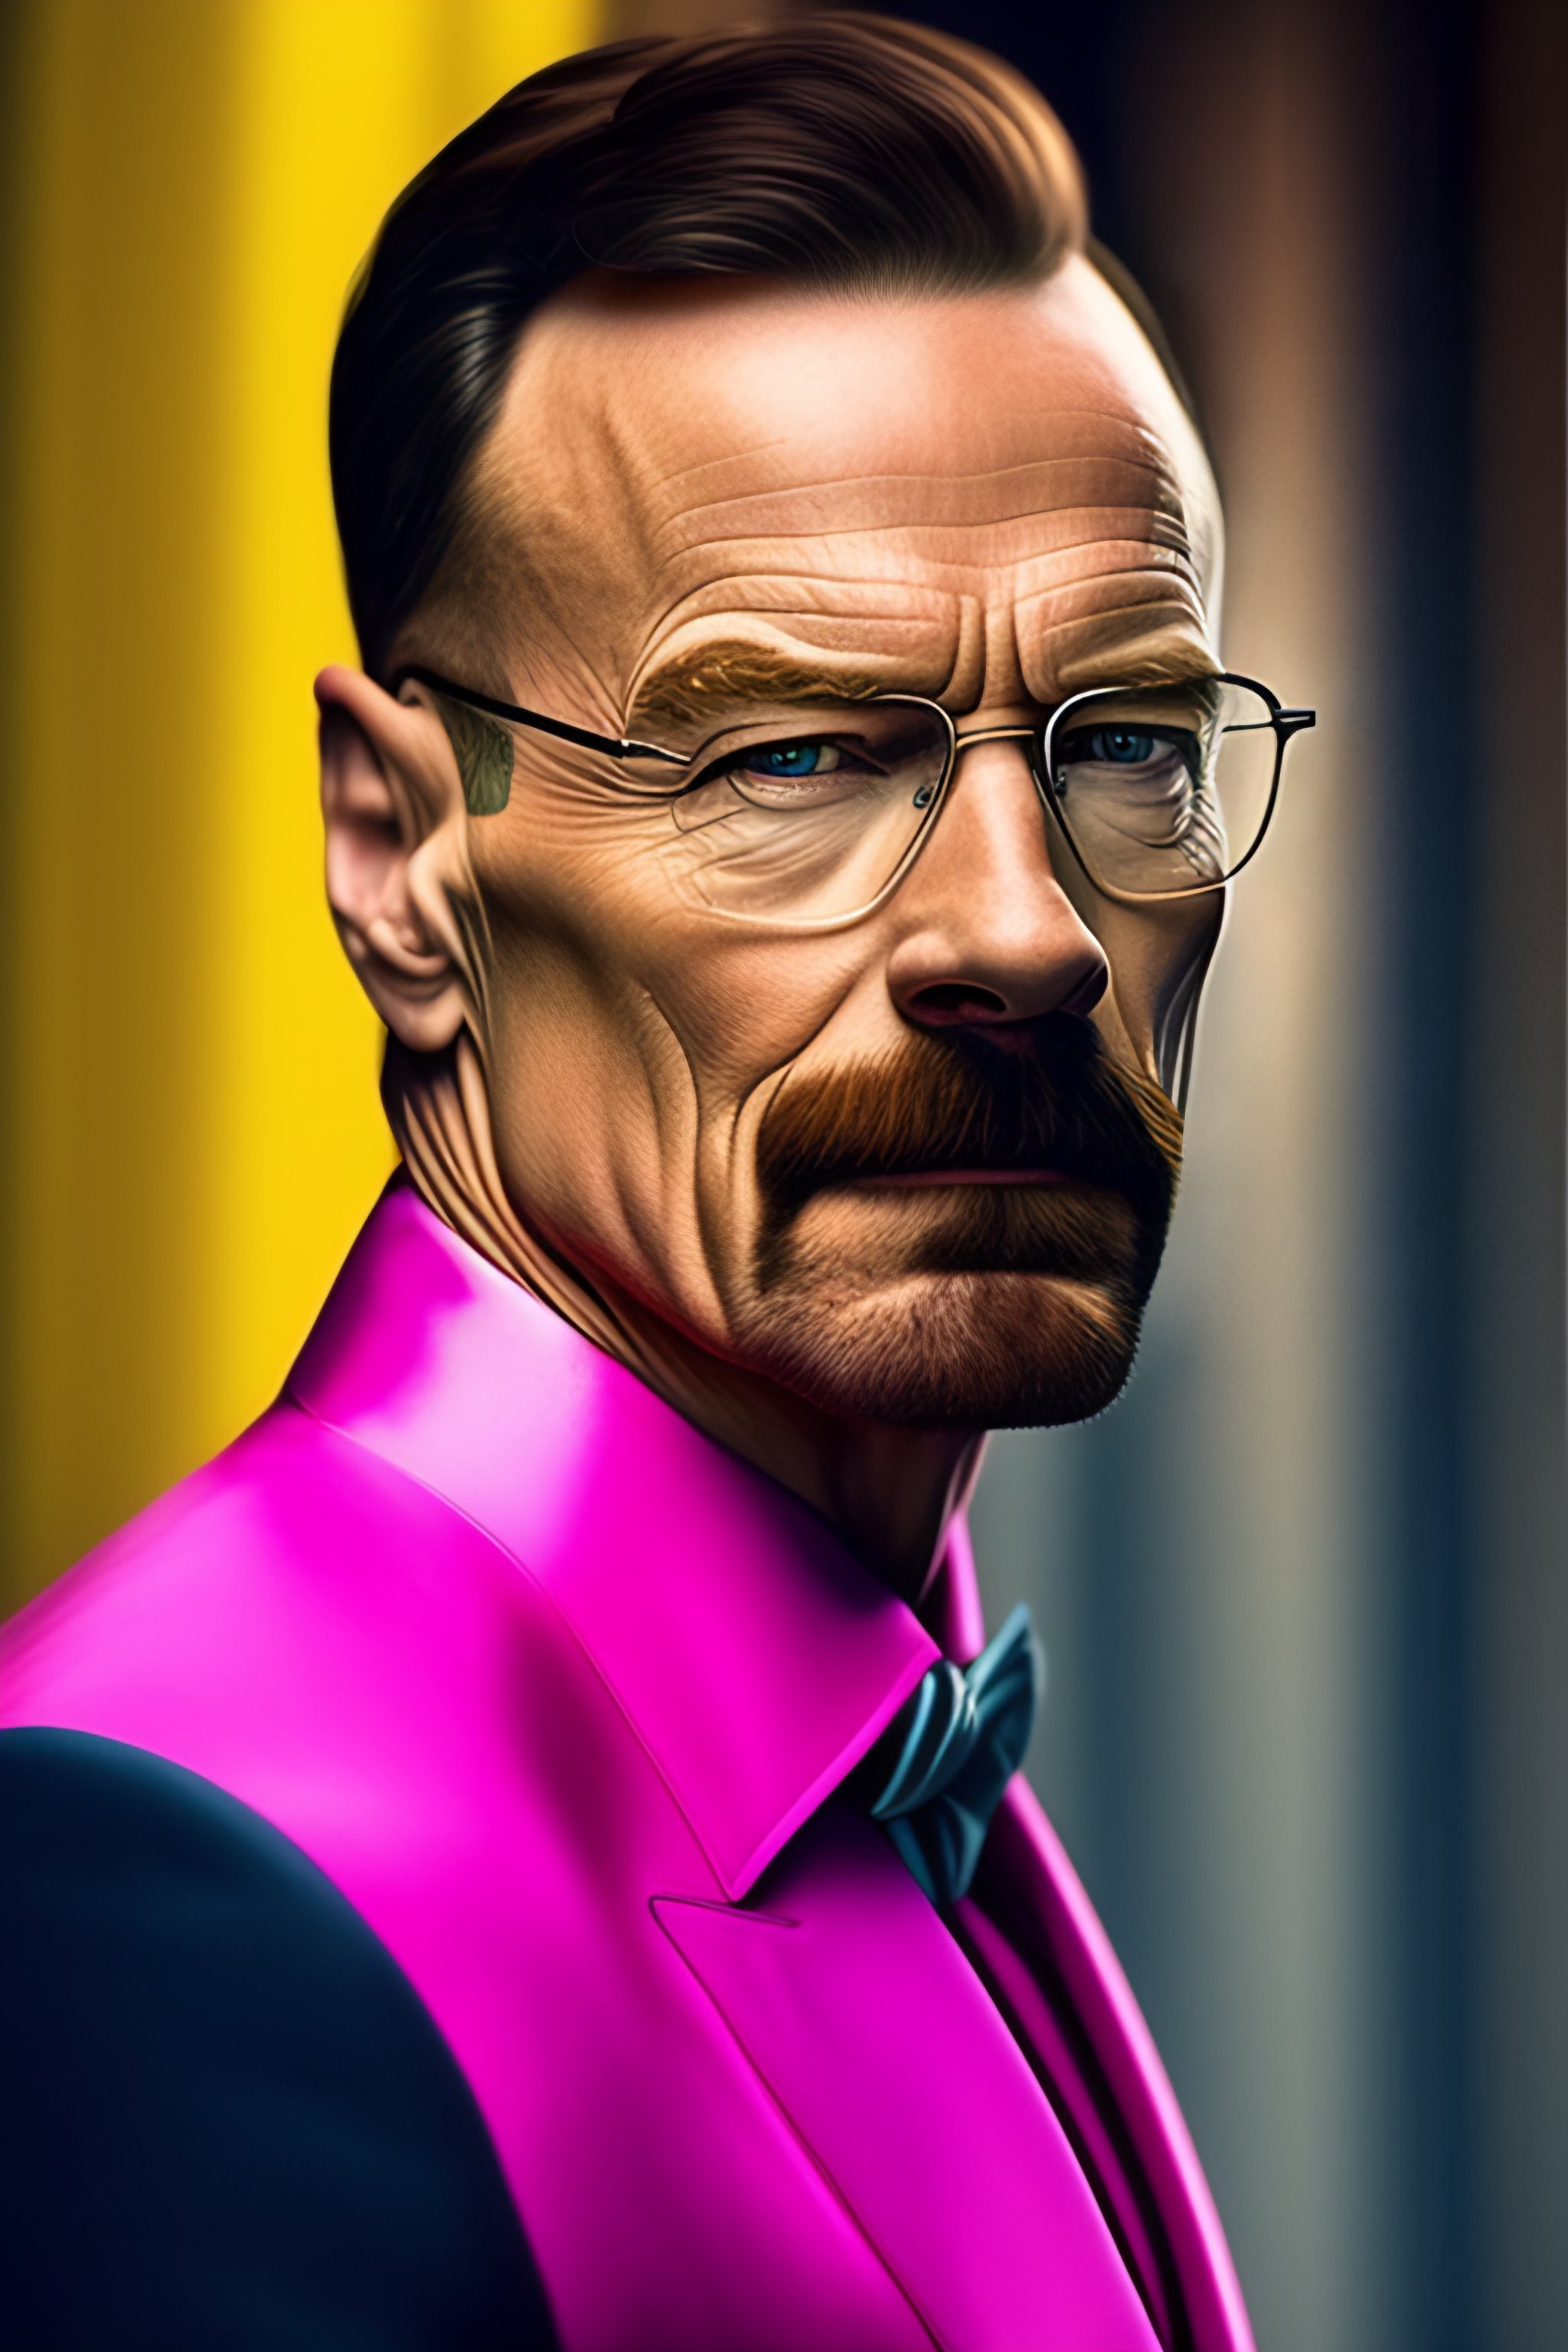 Lexica - Walter white wearing a pink dress